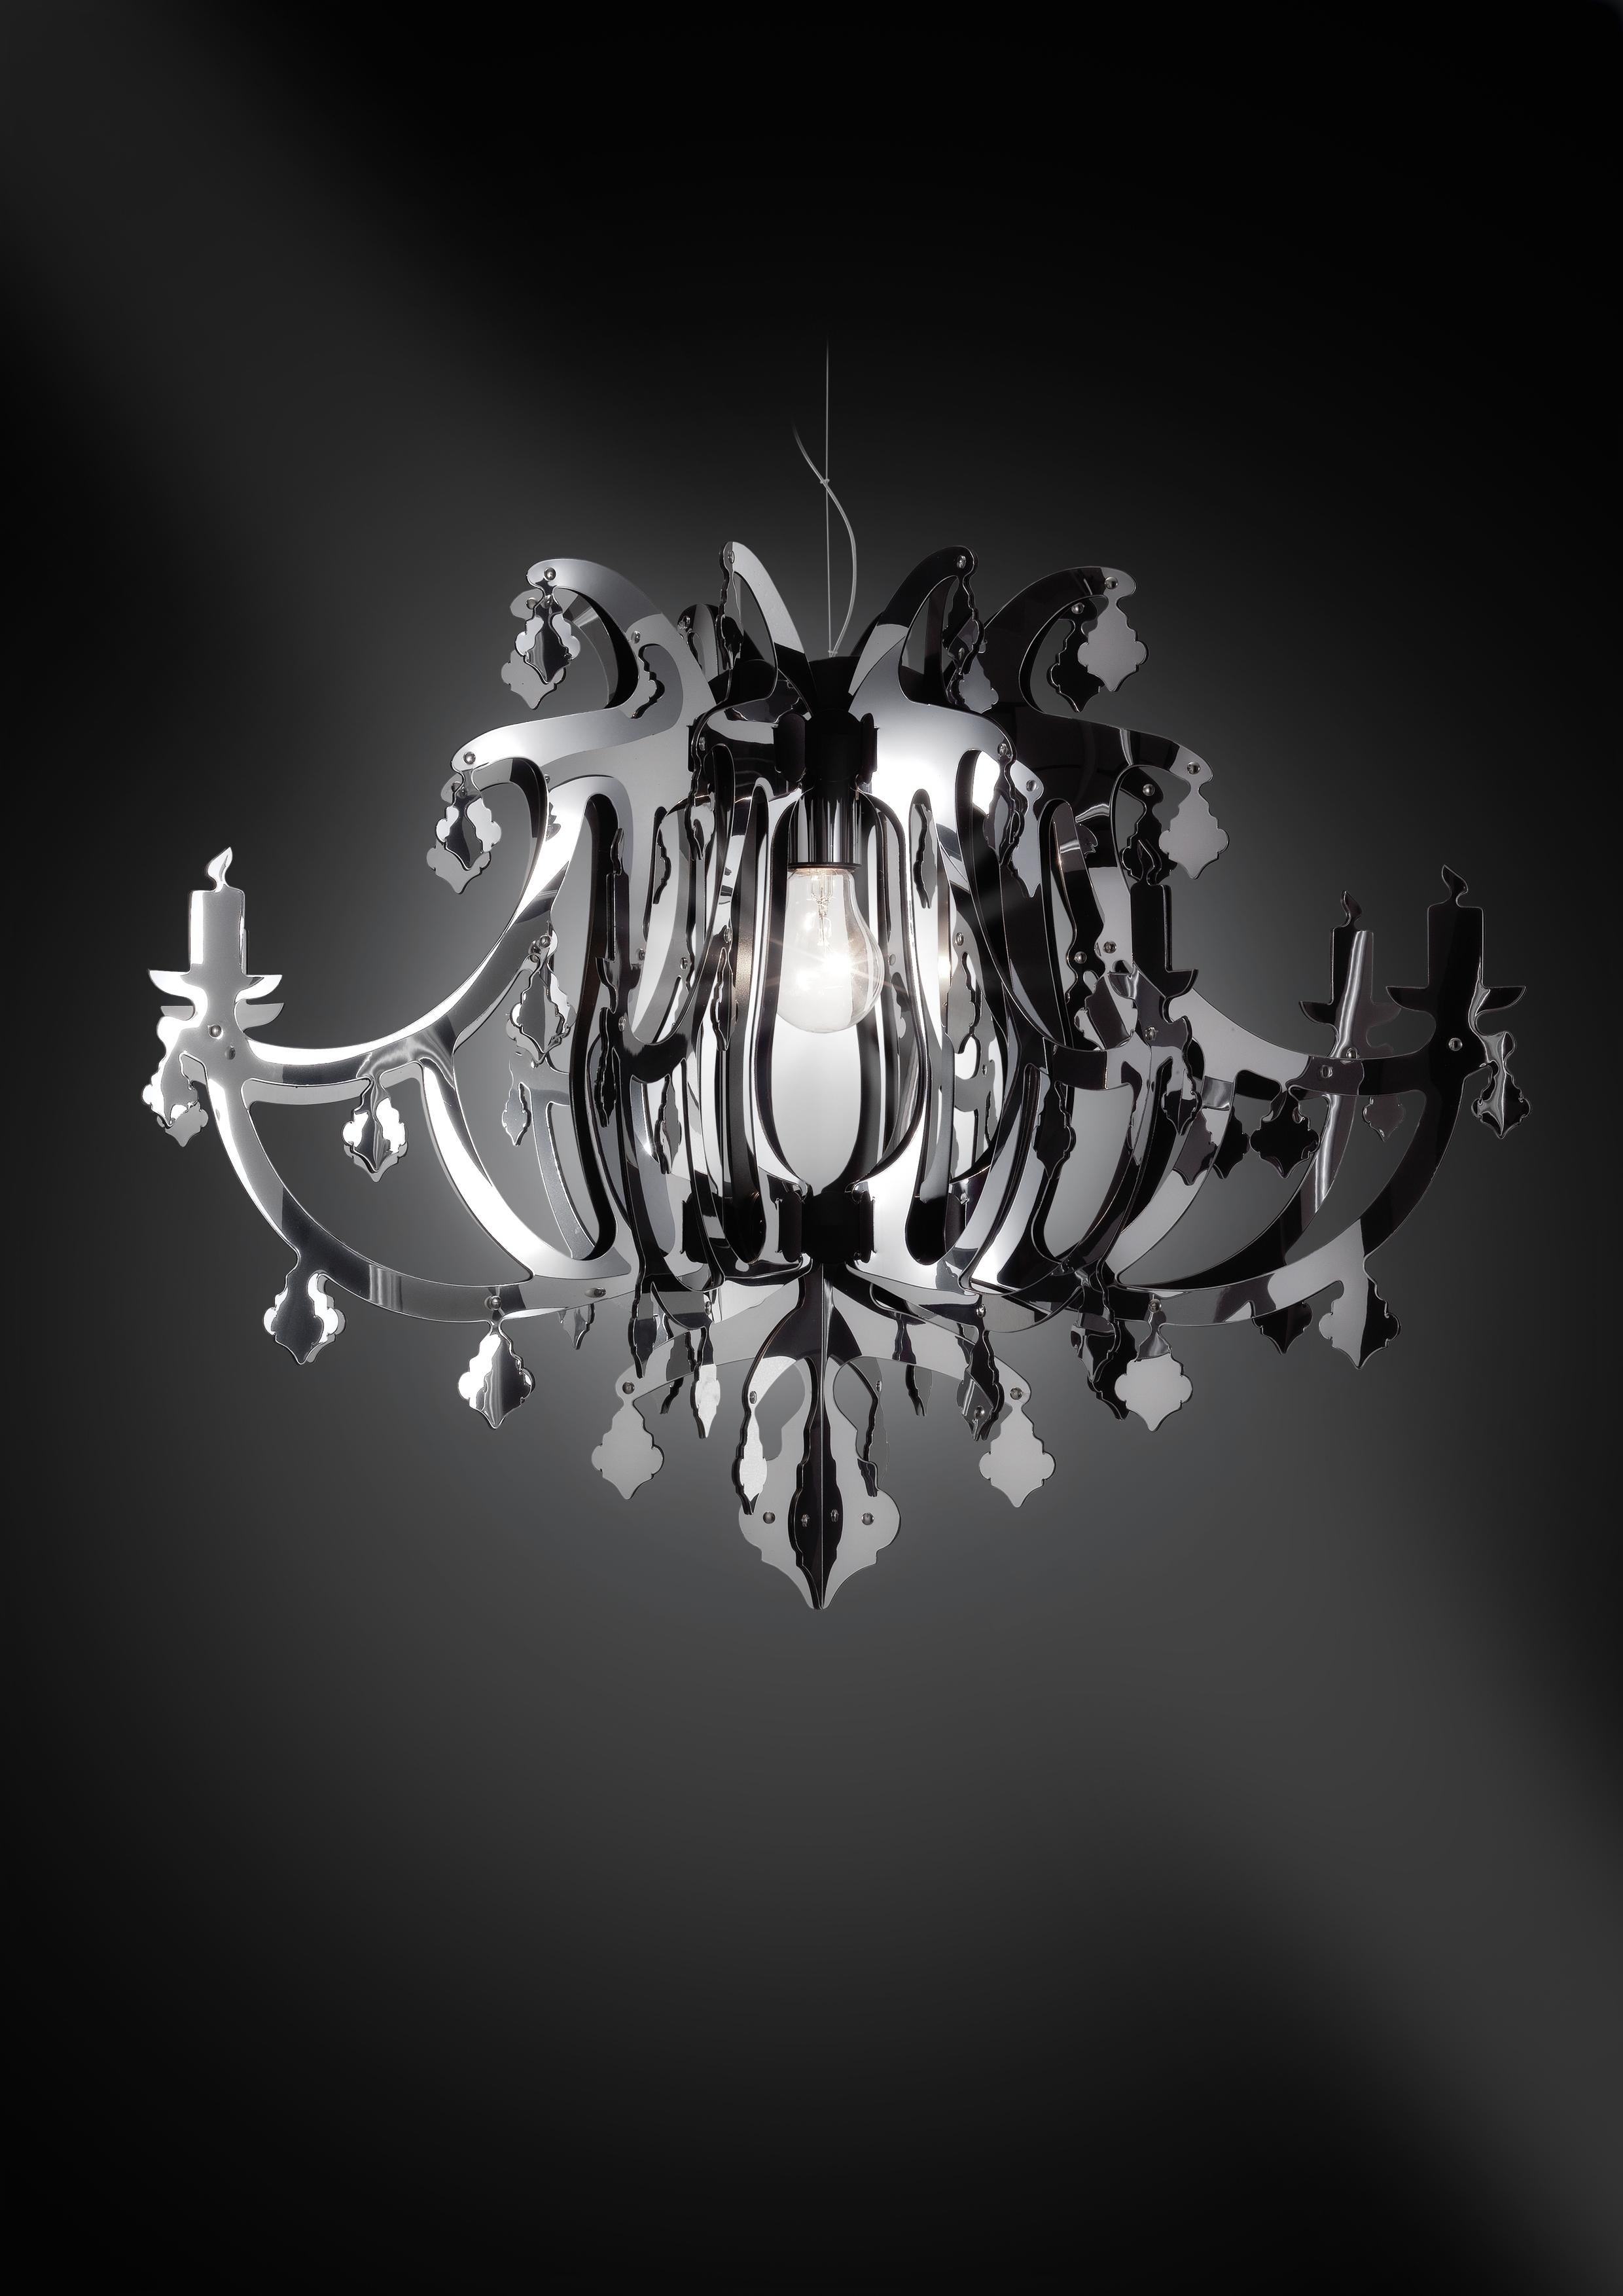 A classic 8-arm chandelier underwent digital evolution; Ginetta’s sumptuous modern shape extends from a central light source that casts elegant, refined reflections, blending into both modern and aristocratic atmospheres. The cylindric diffusor in